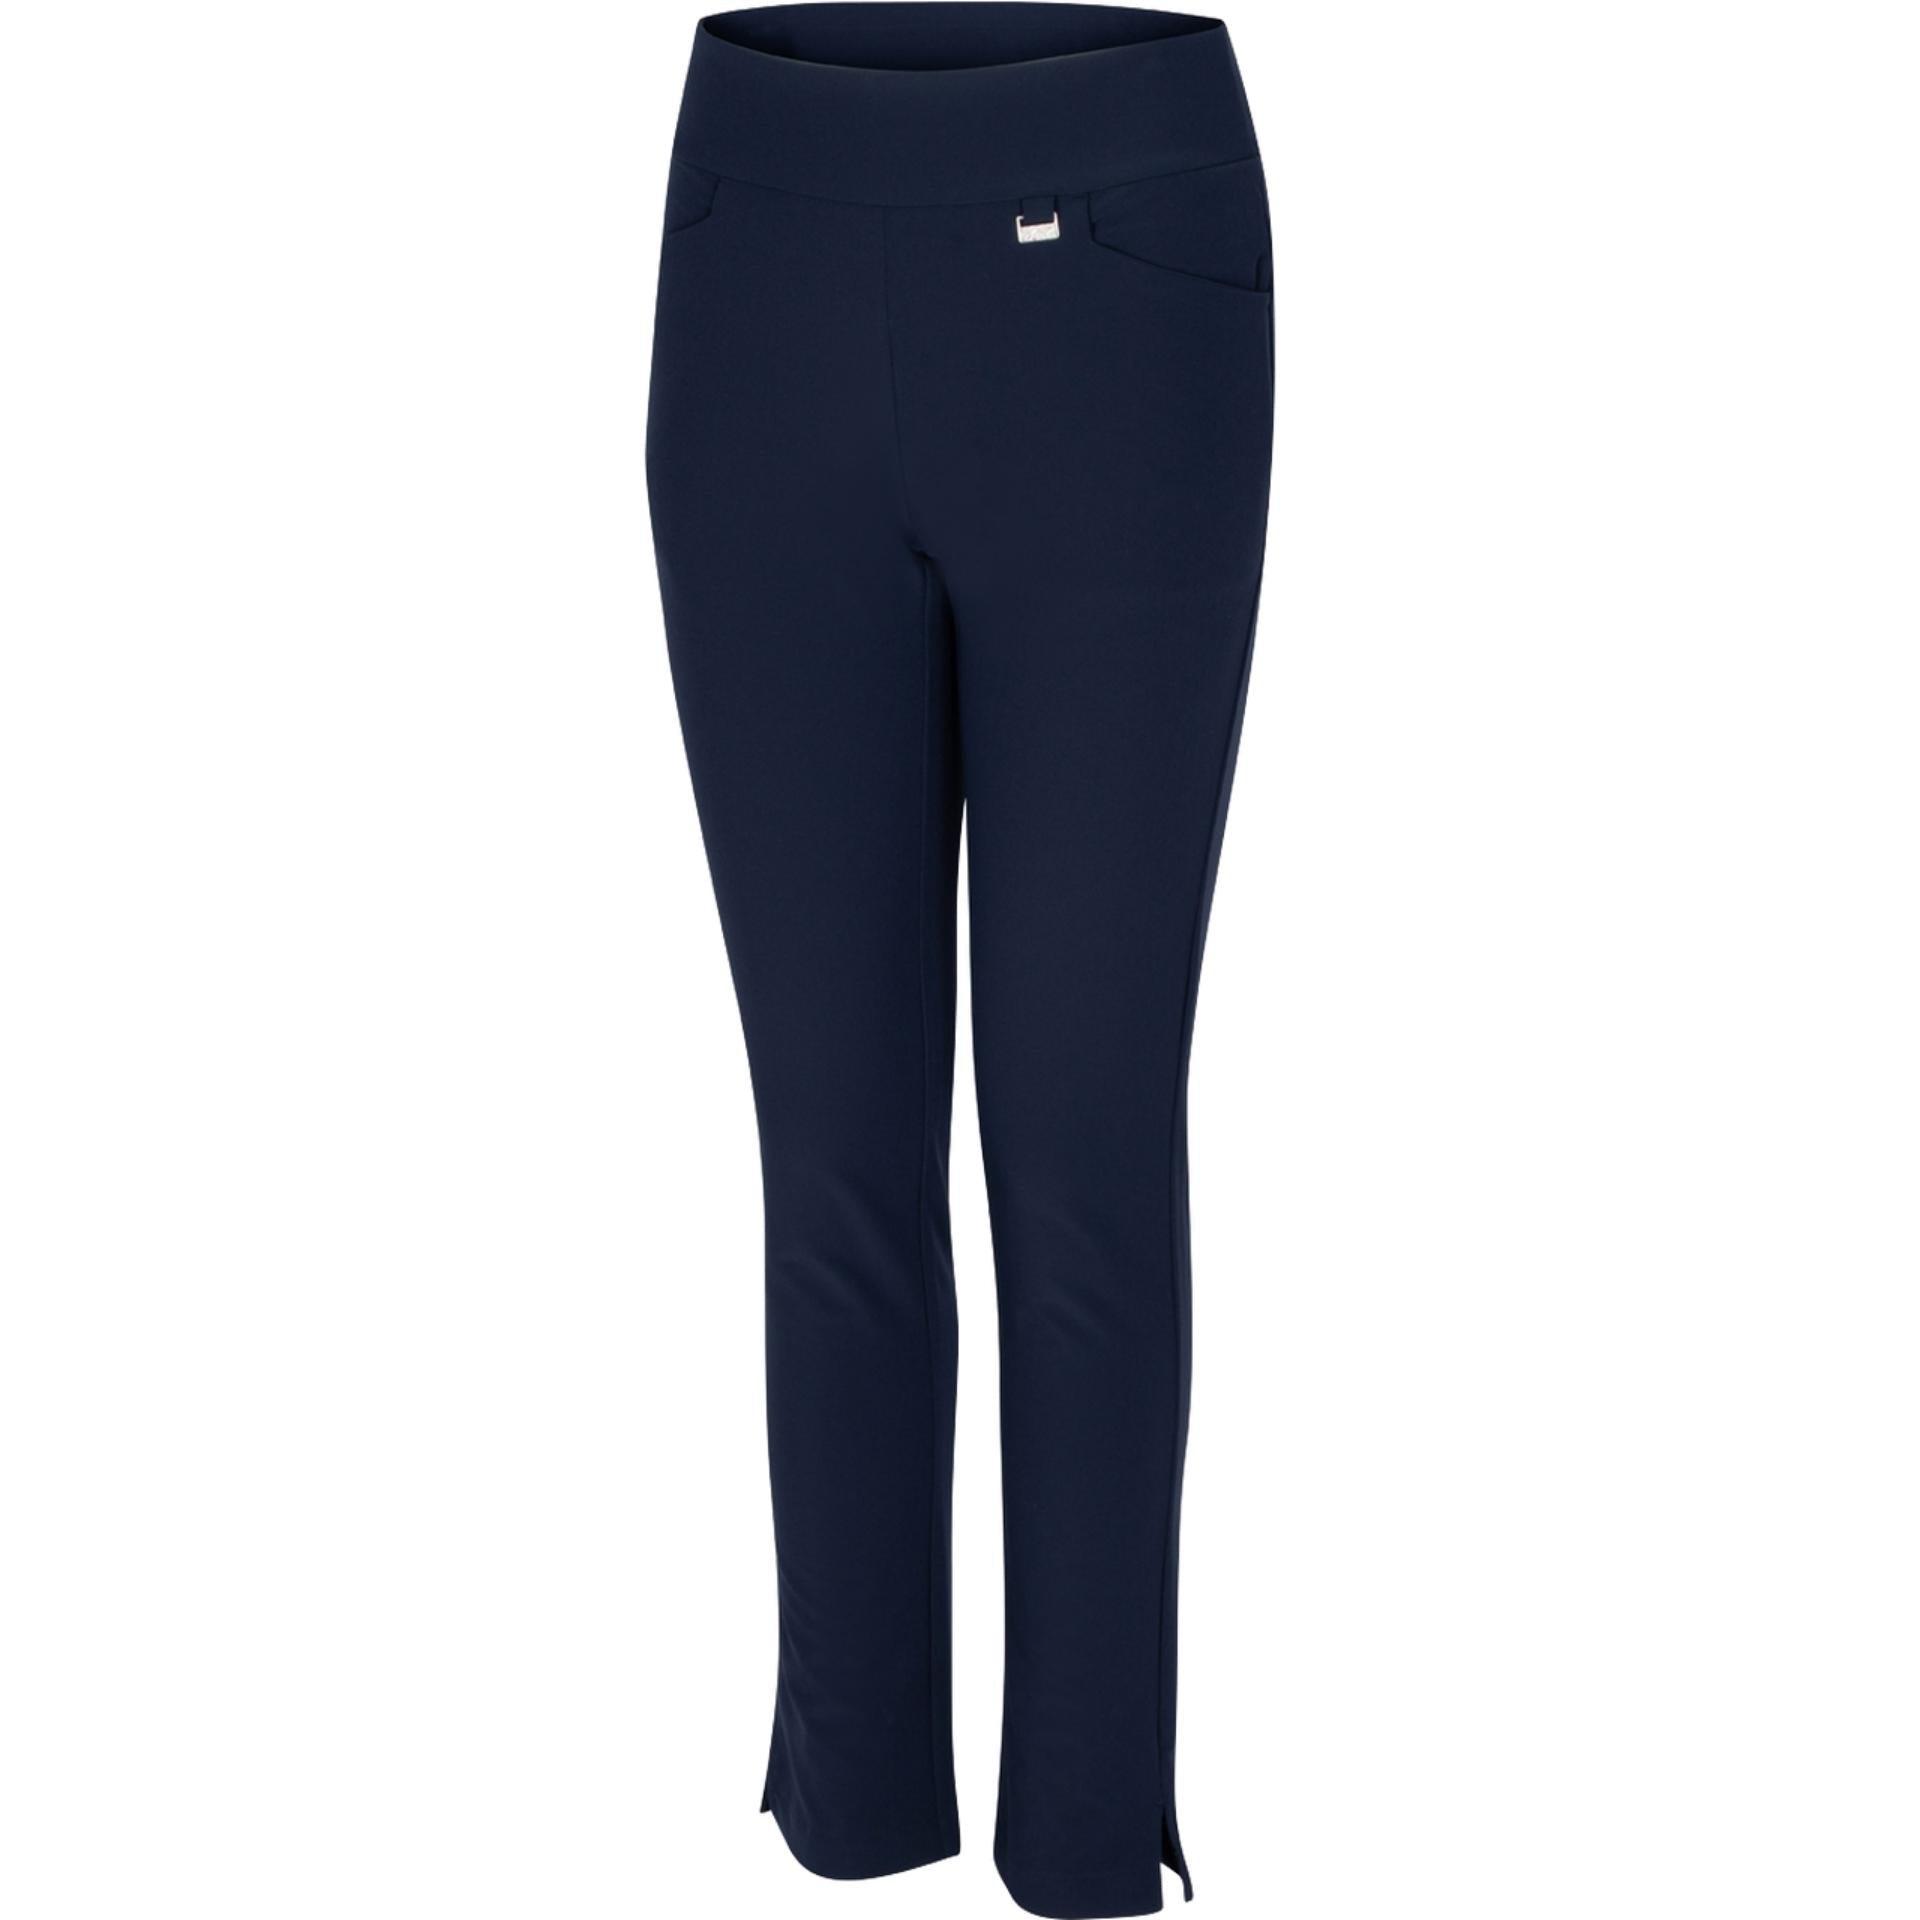 Greg Norman Women's Essential Pull-On Stretch Pants 2022 –